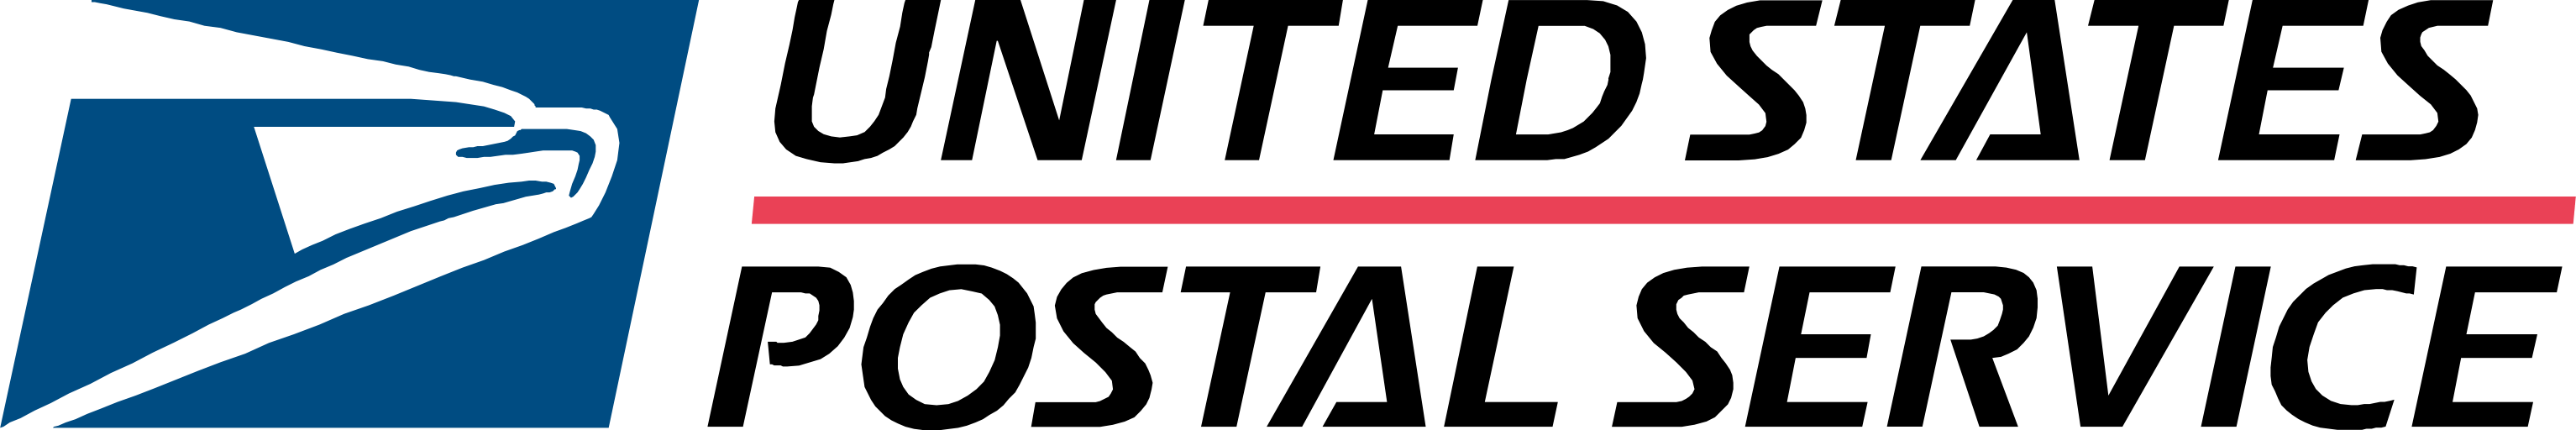 united states clipart high resolution